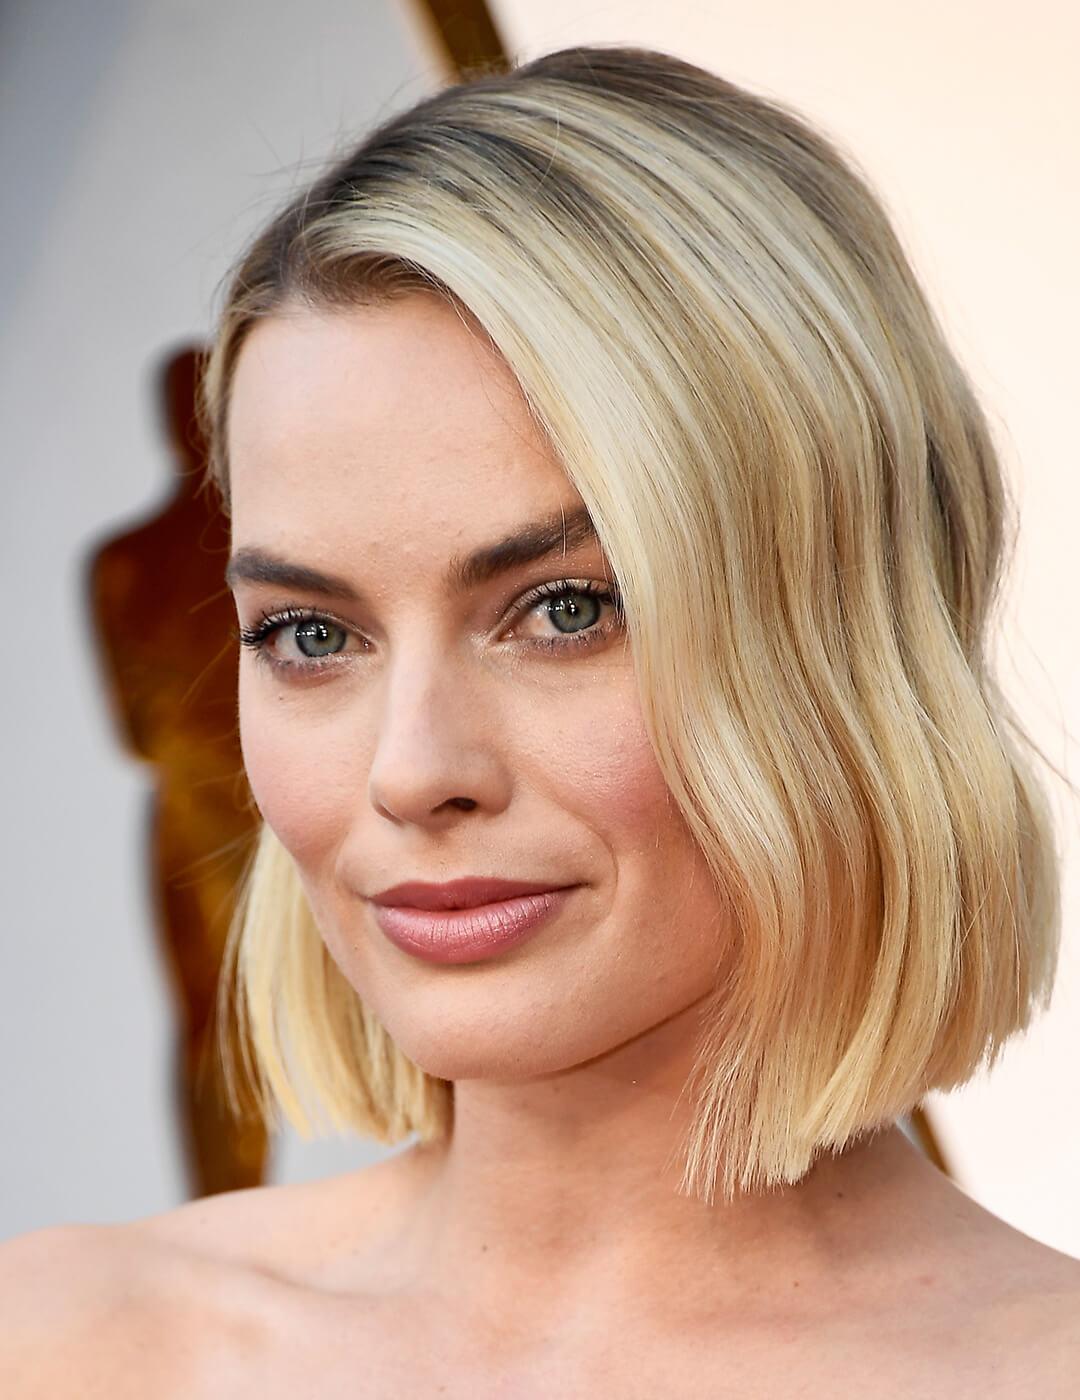 A photo of a green-eyed Margot Robbie smiling in the camera with her long bob hair style